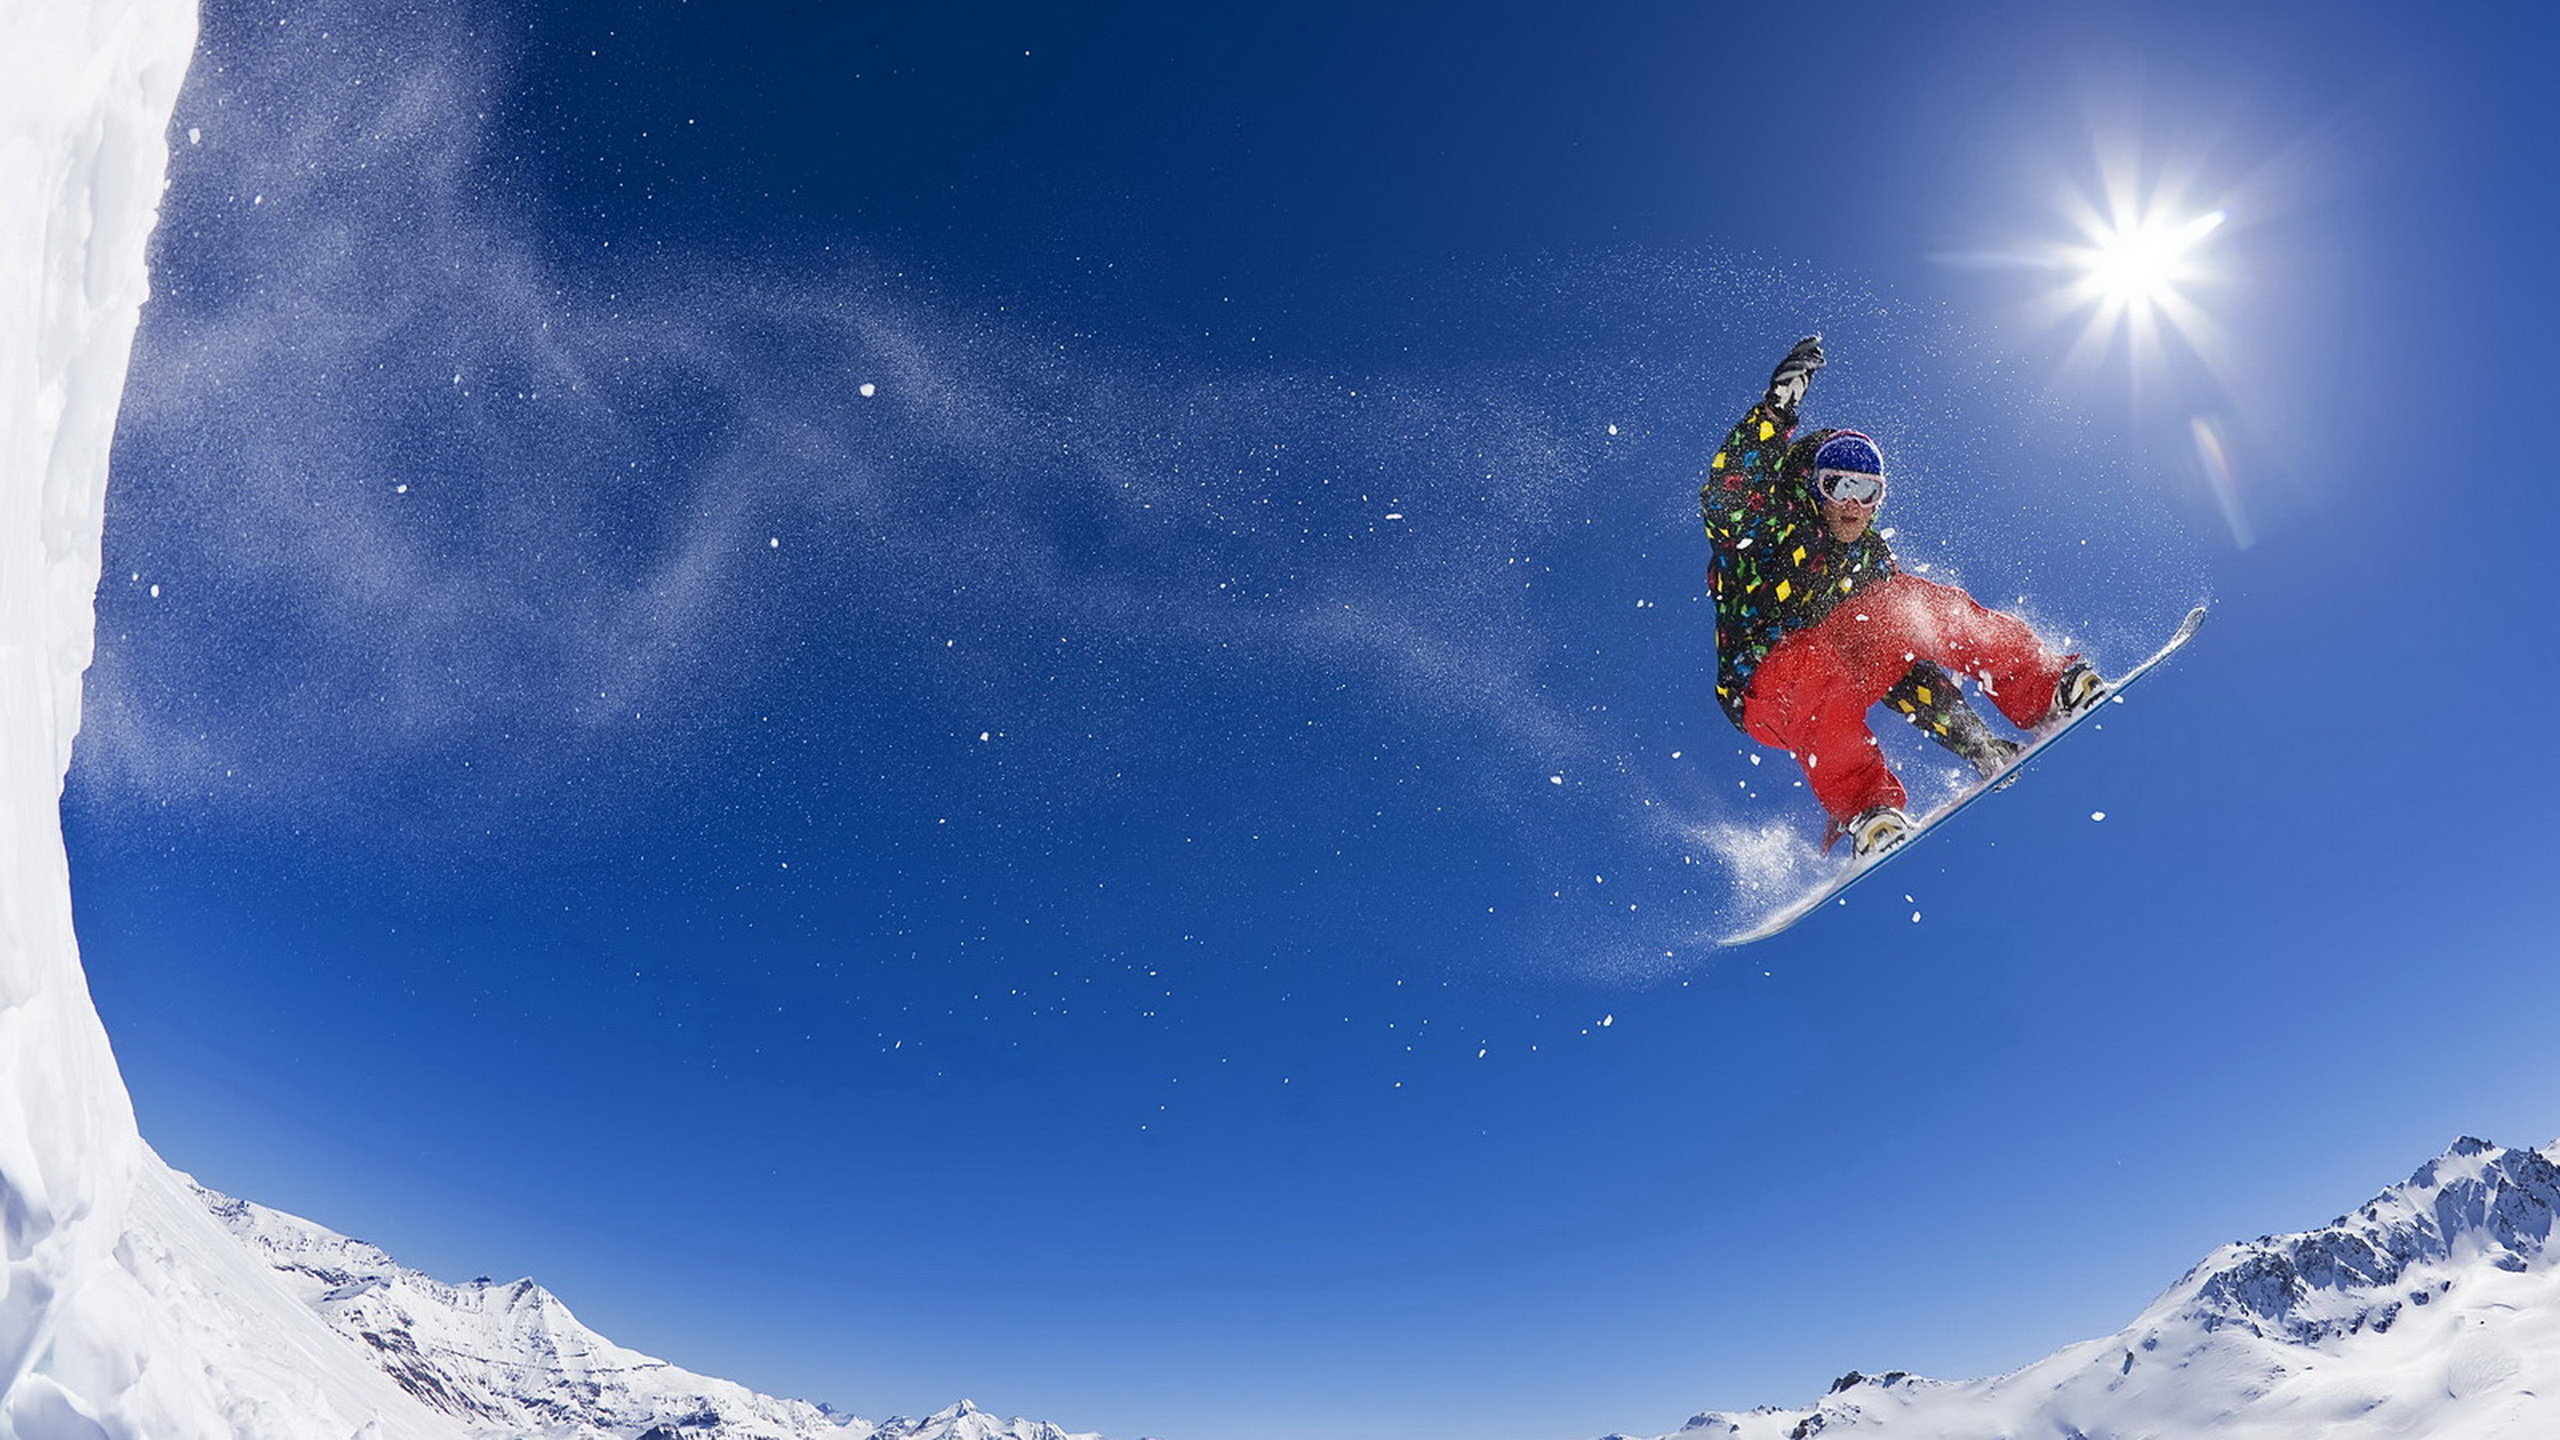 High resolution Snowboarding hd 2560x1440 background ID:55797 for PC